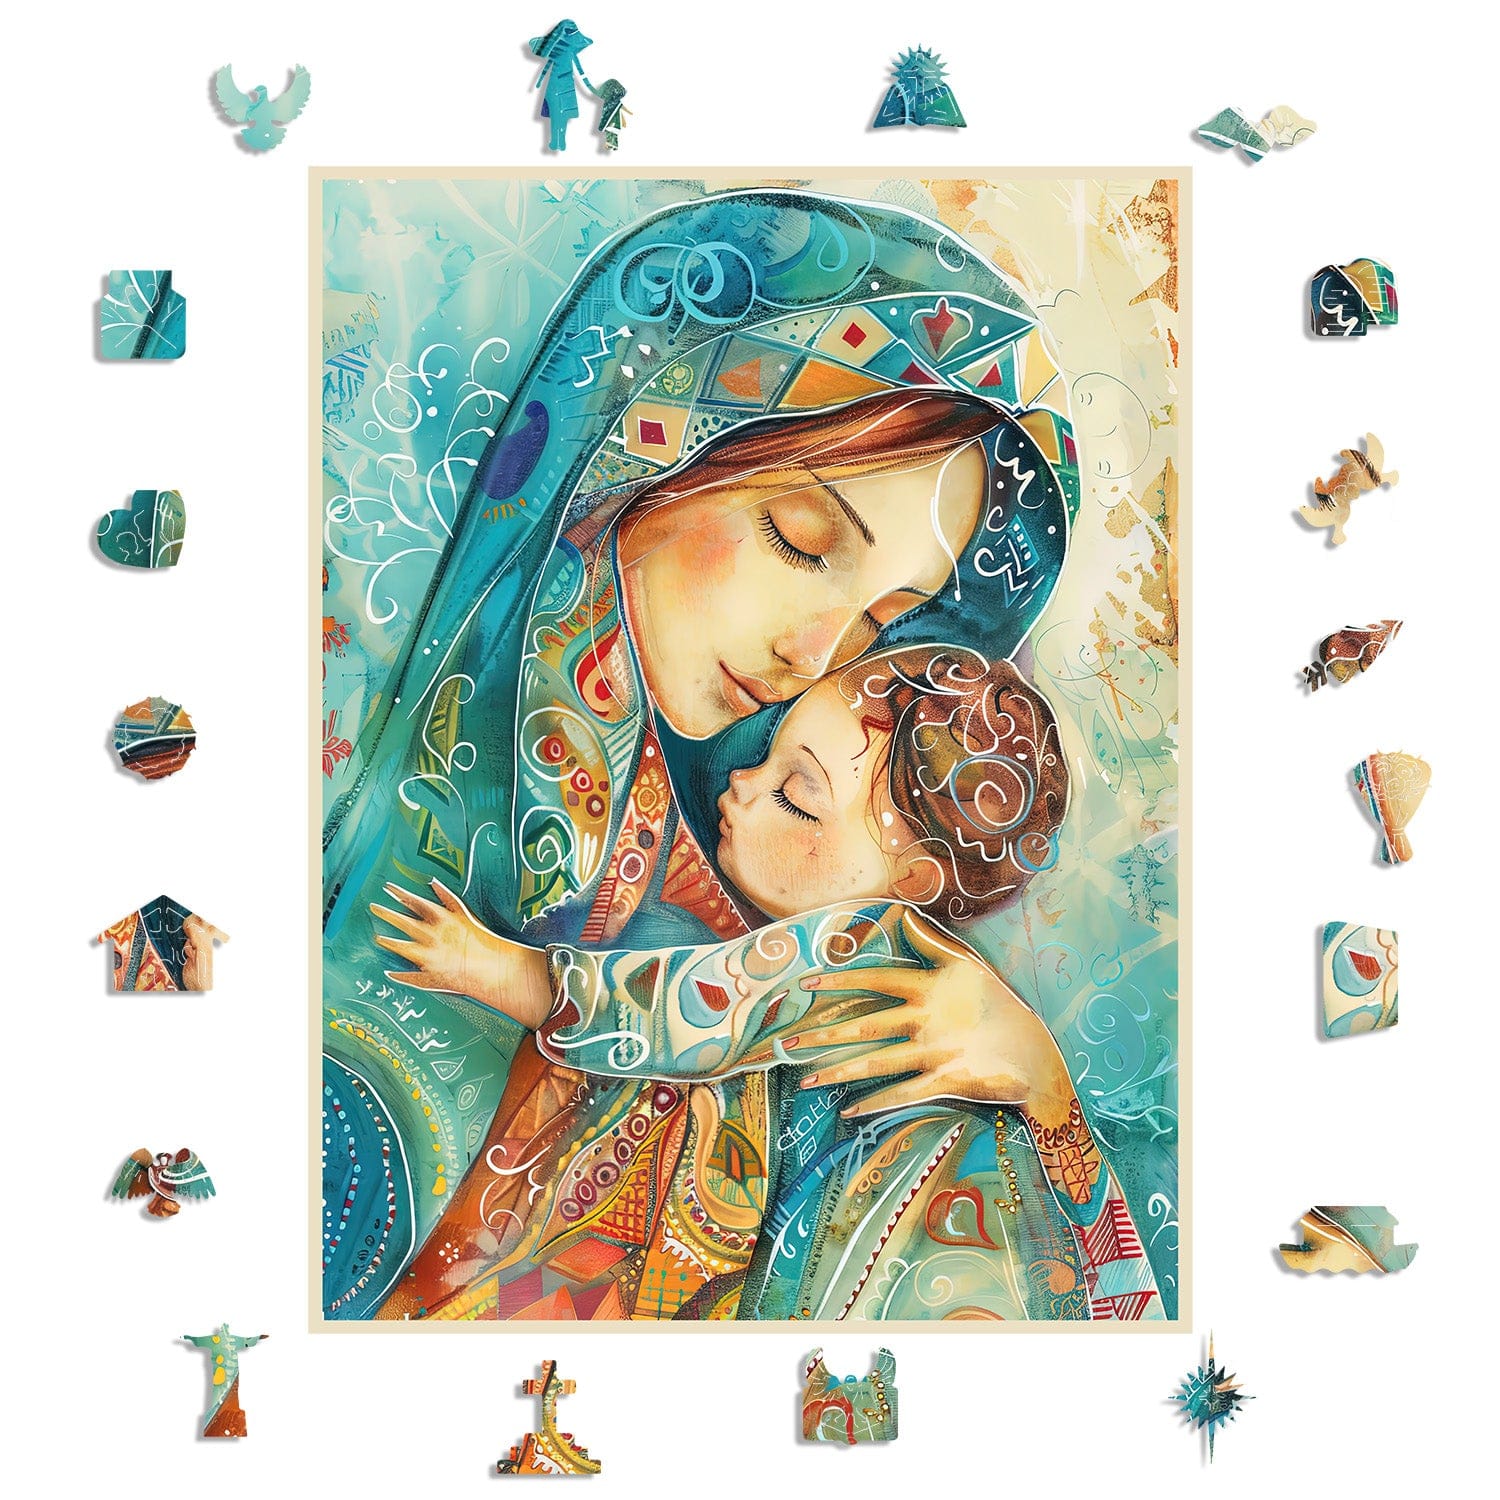 Animal Jigsaw Puzzle > Wooden Jigsaw Puzzle > Jigsaw Puzzle Eternal Love - Jigsaw Puzzle